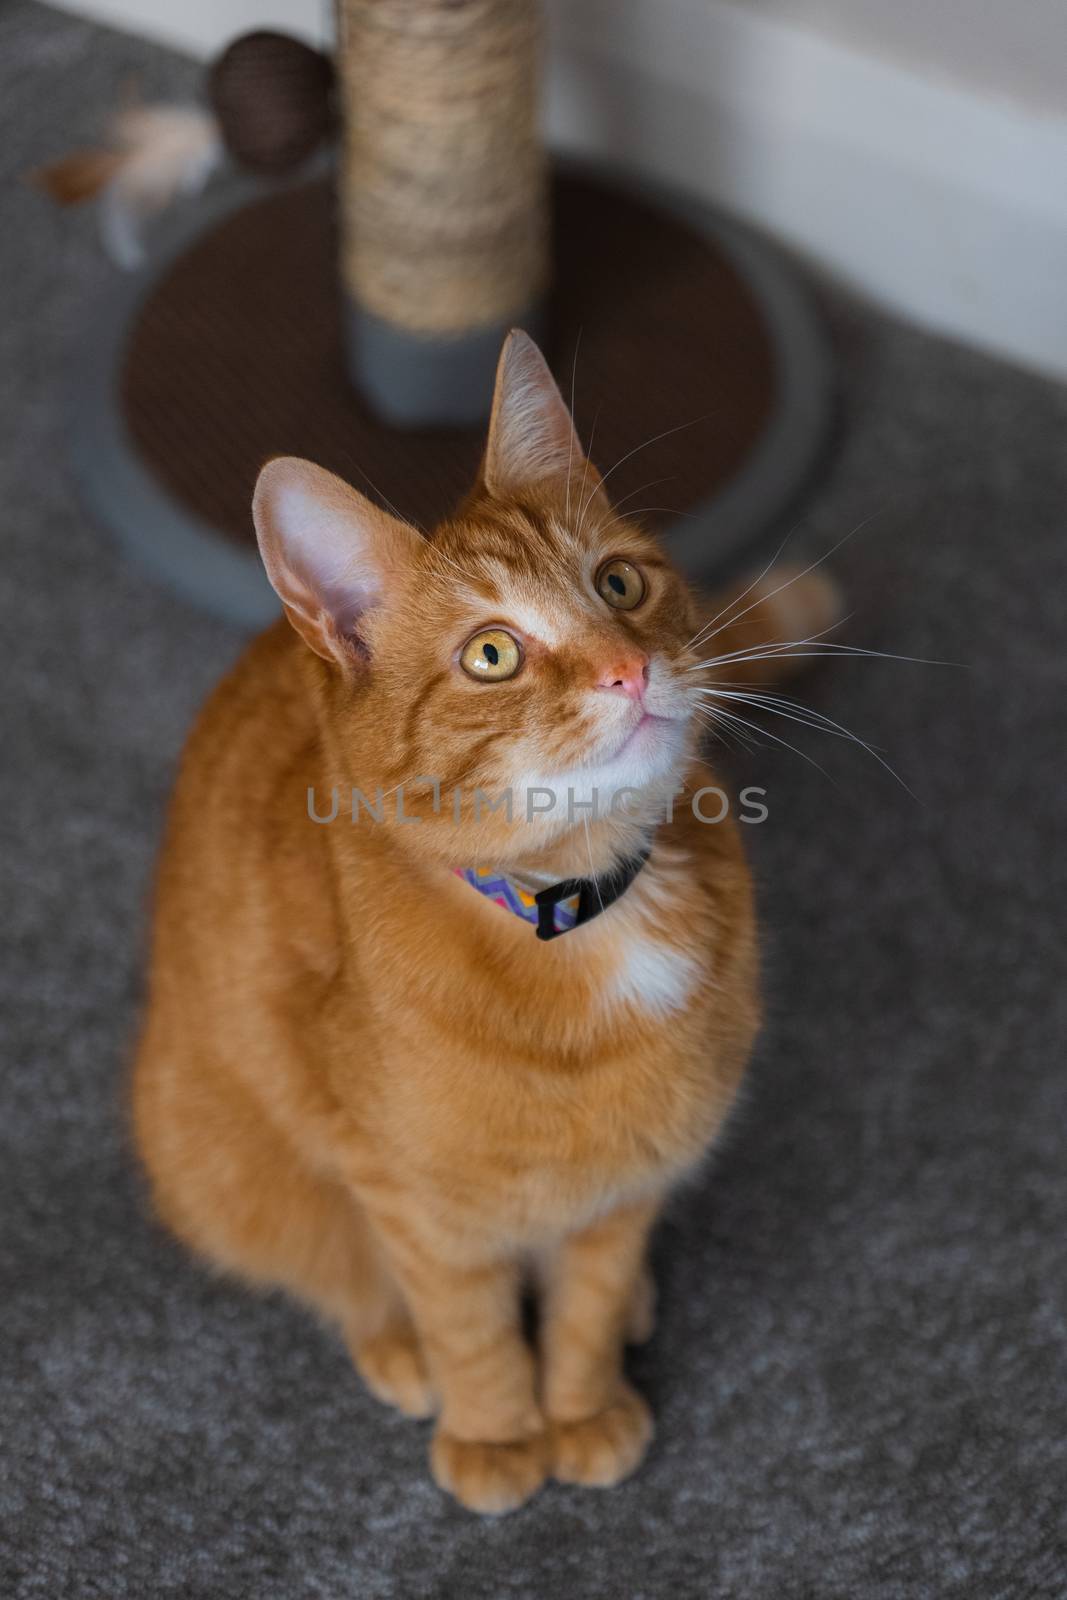 A portrait of an adorable young domestic ginger tabby cat sat at home next to his scratching post looking excitable